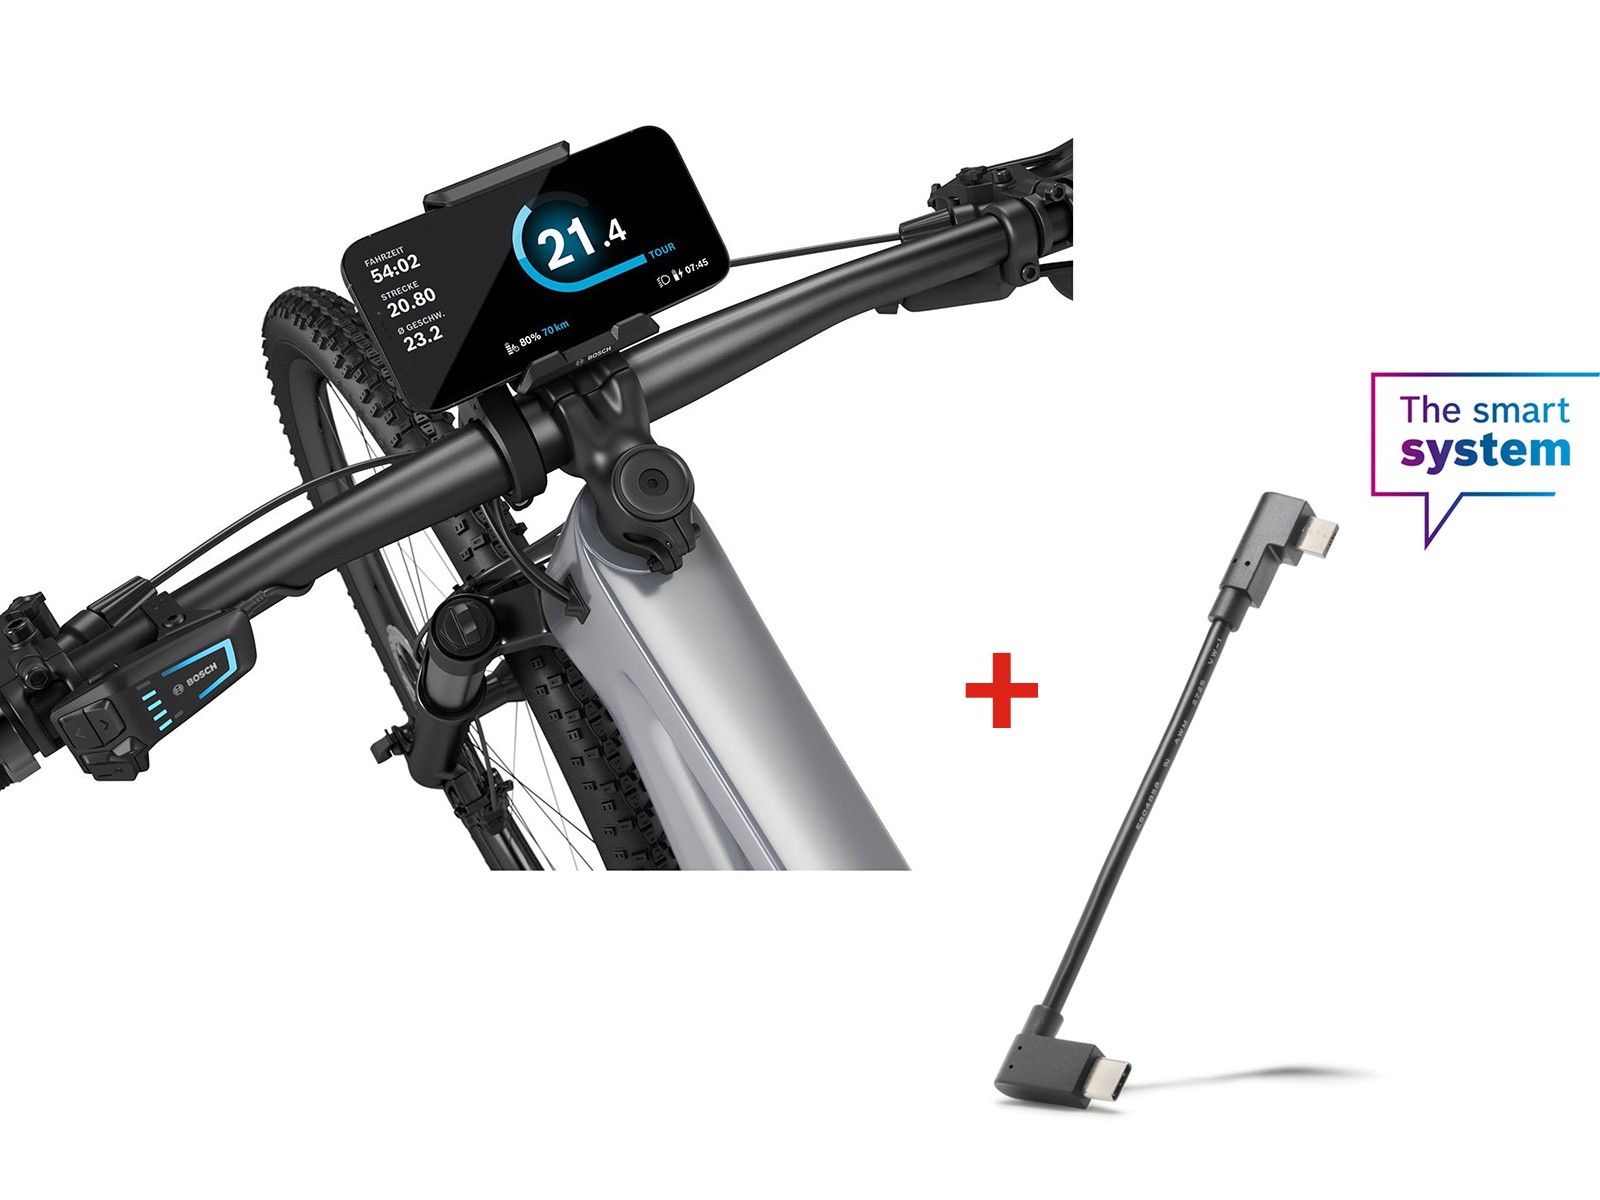 Connected pack - Bosch Ebike Smartphone Grip + USB-C charging cable